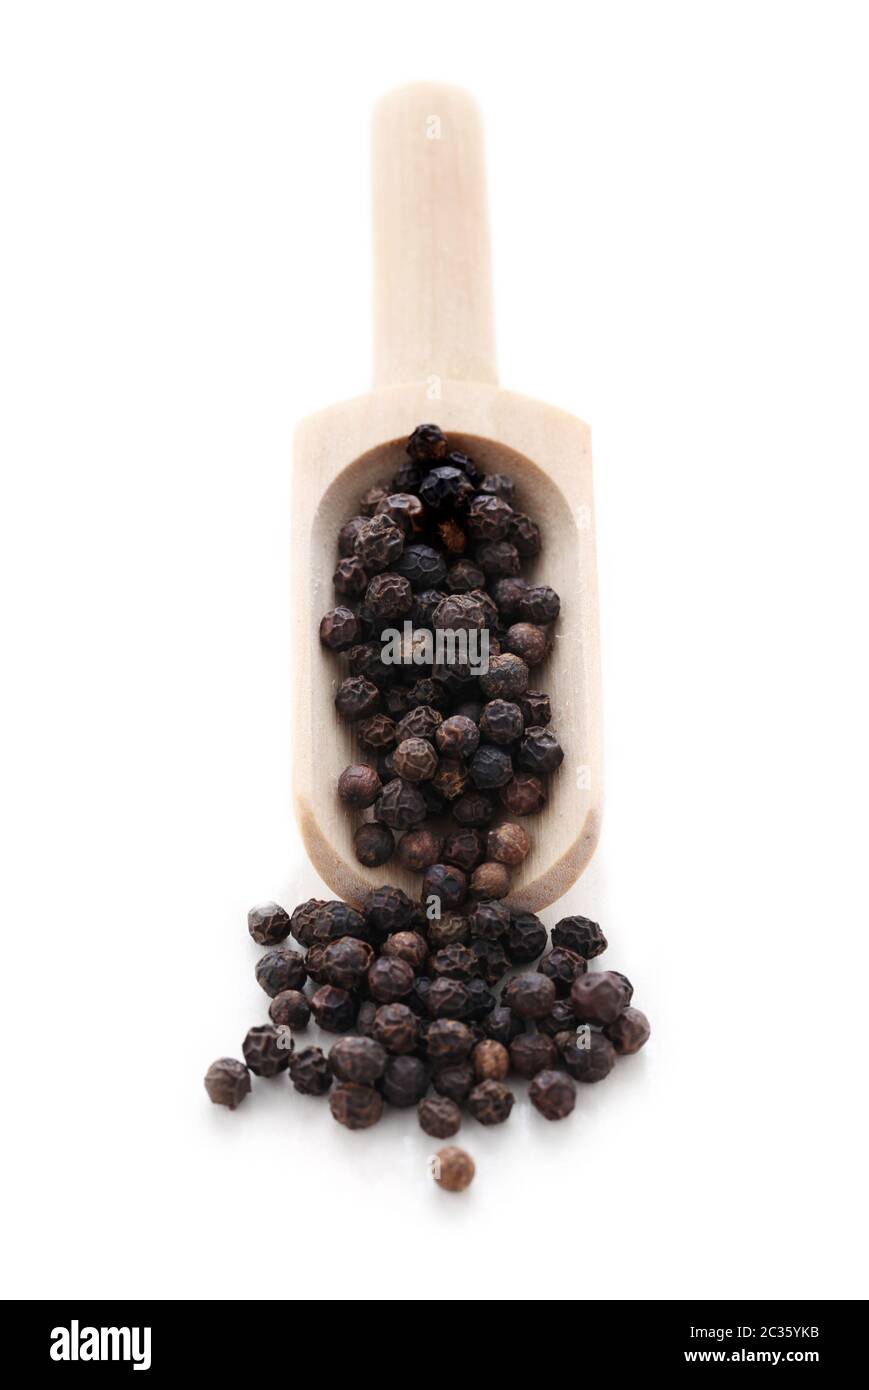 Black Peppercorns In A Wooden Shovel Isolated On White Stock Photo